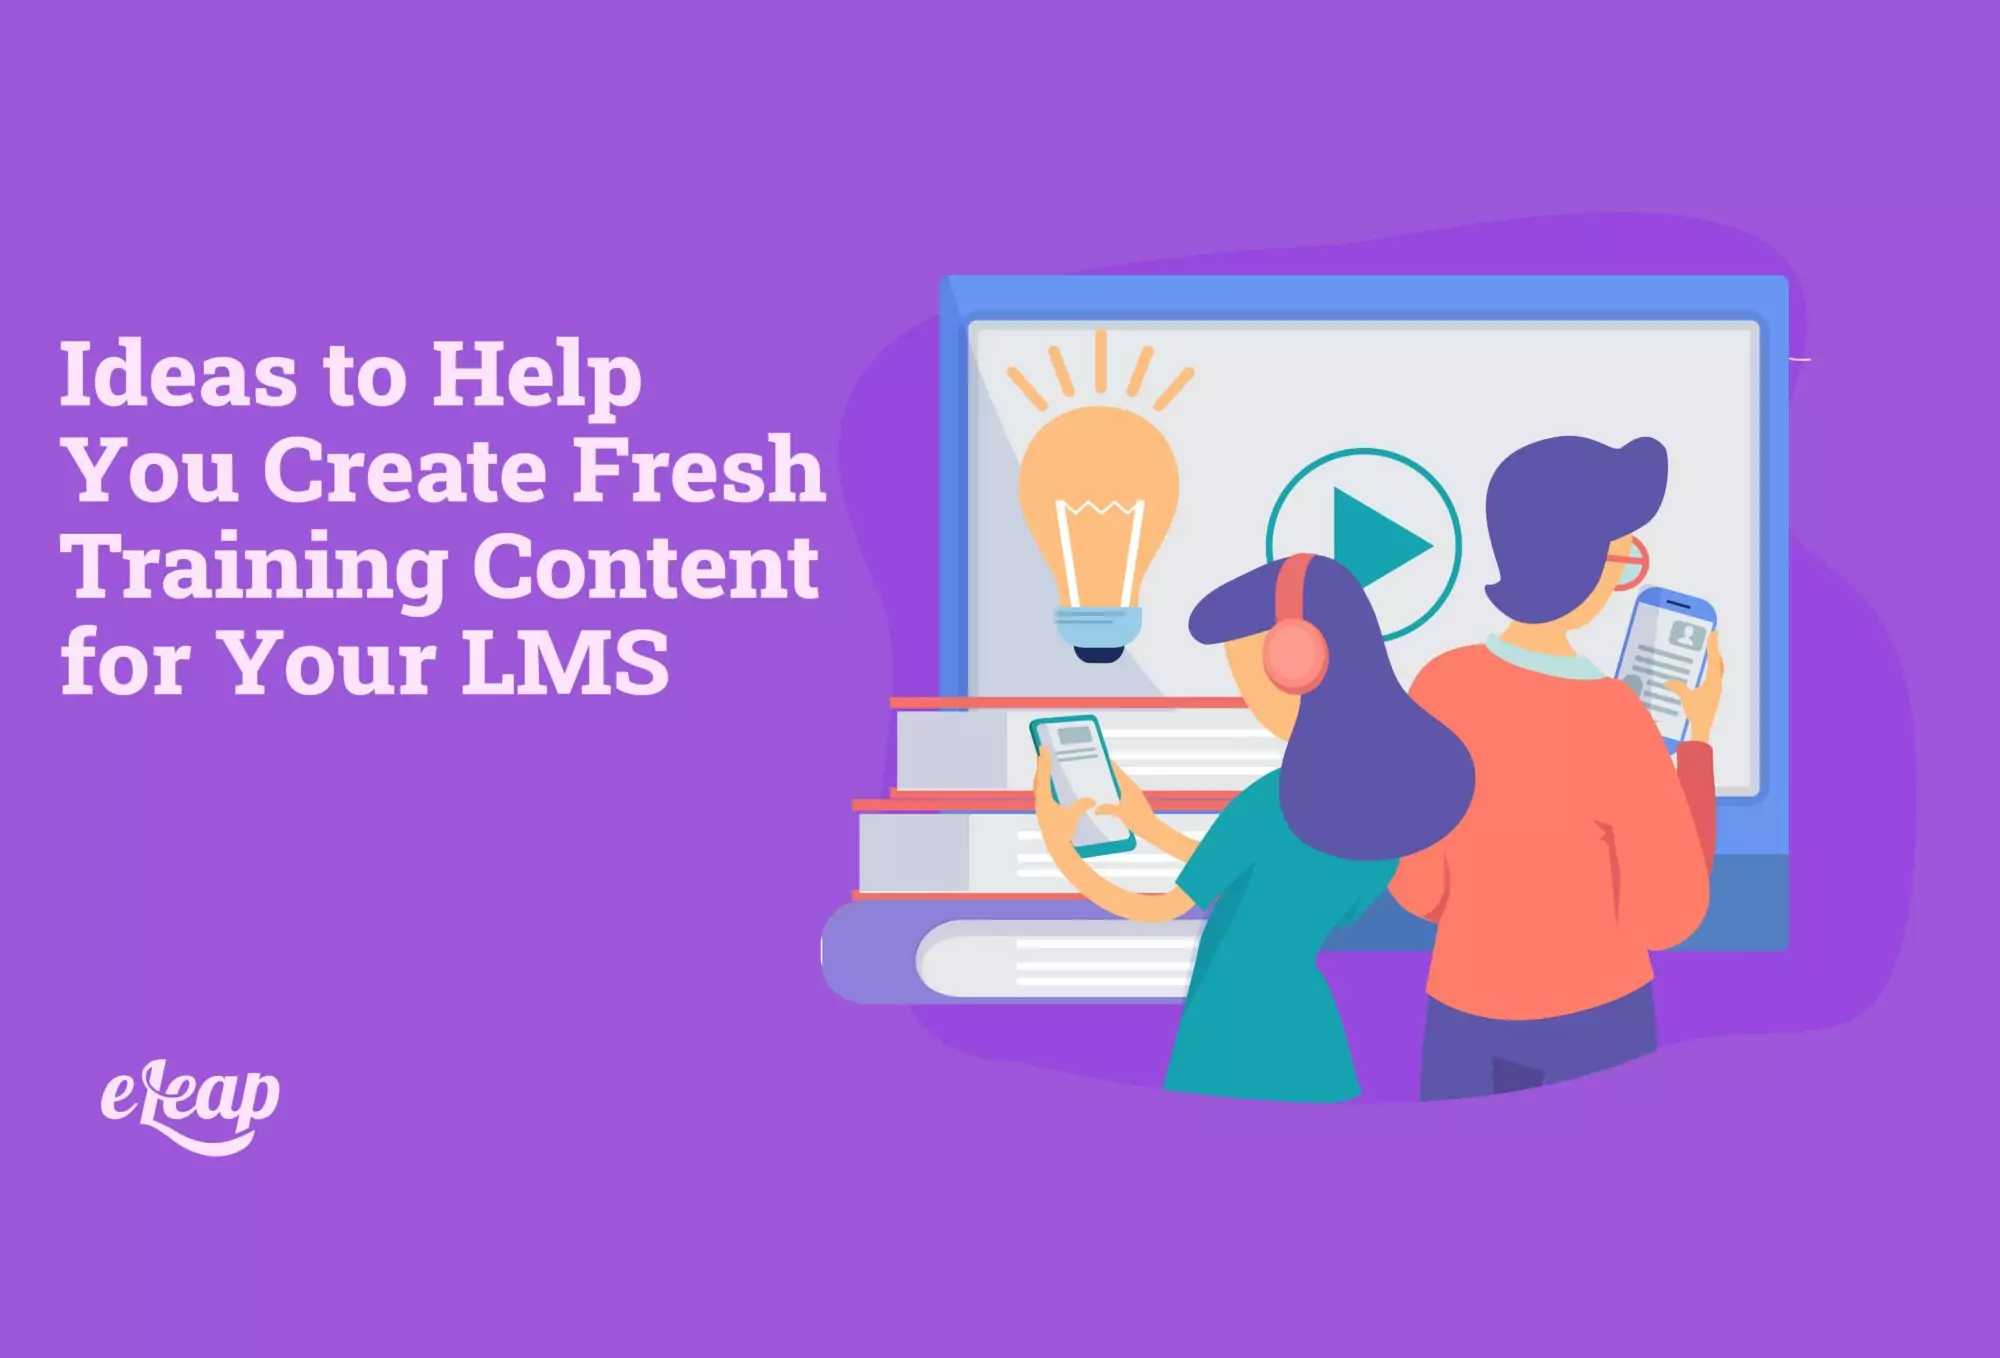 Ideas to Help You Create Fresh Training Content for Your LMS